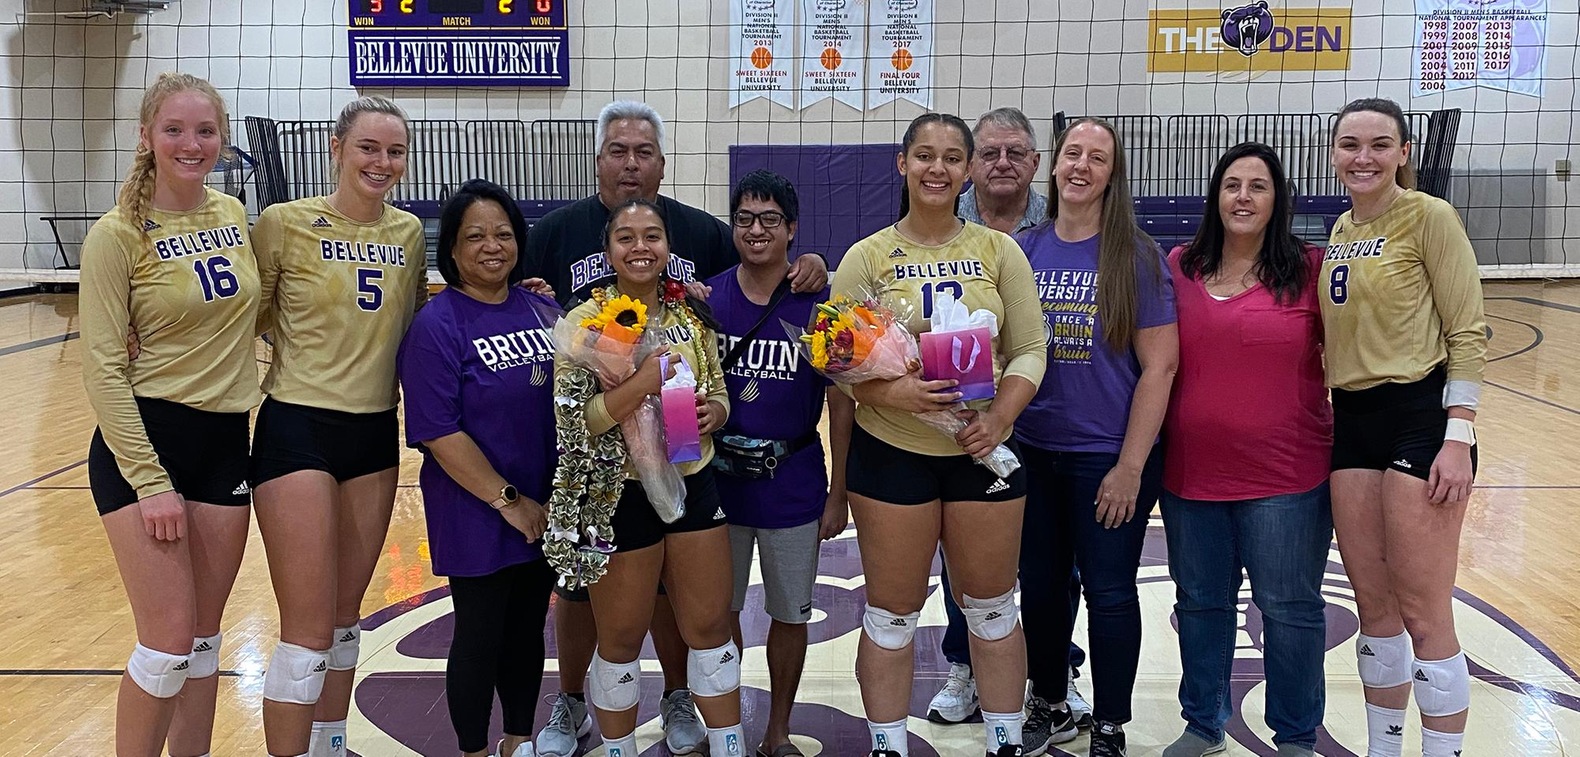 Seniors Jorie Lincoln and Payton Fehringer were honored following the match on Senior Day.